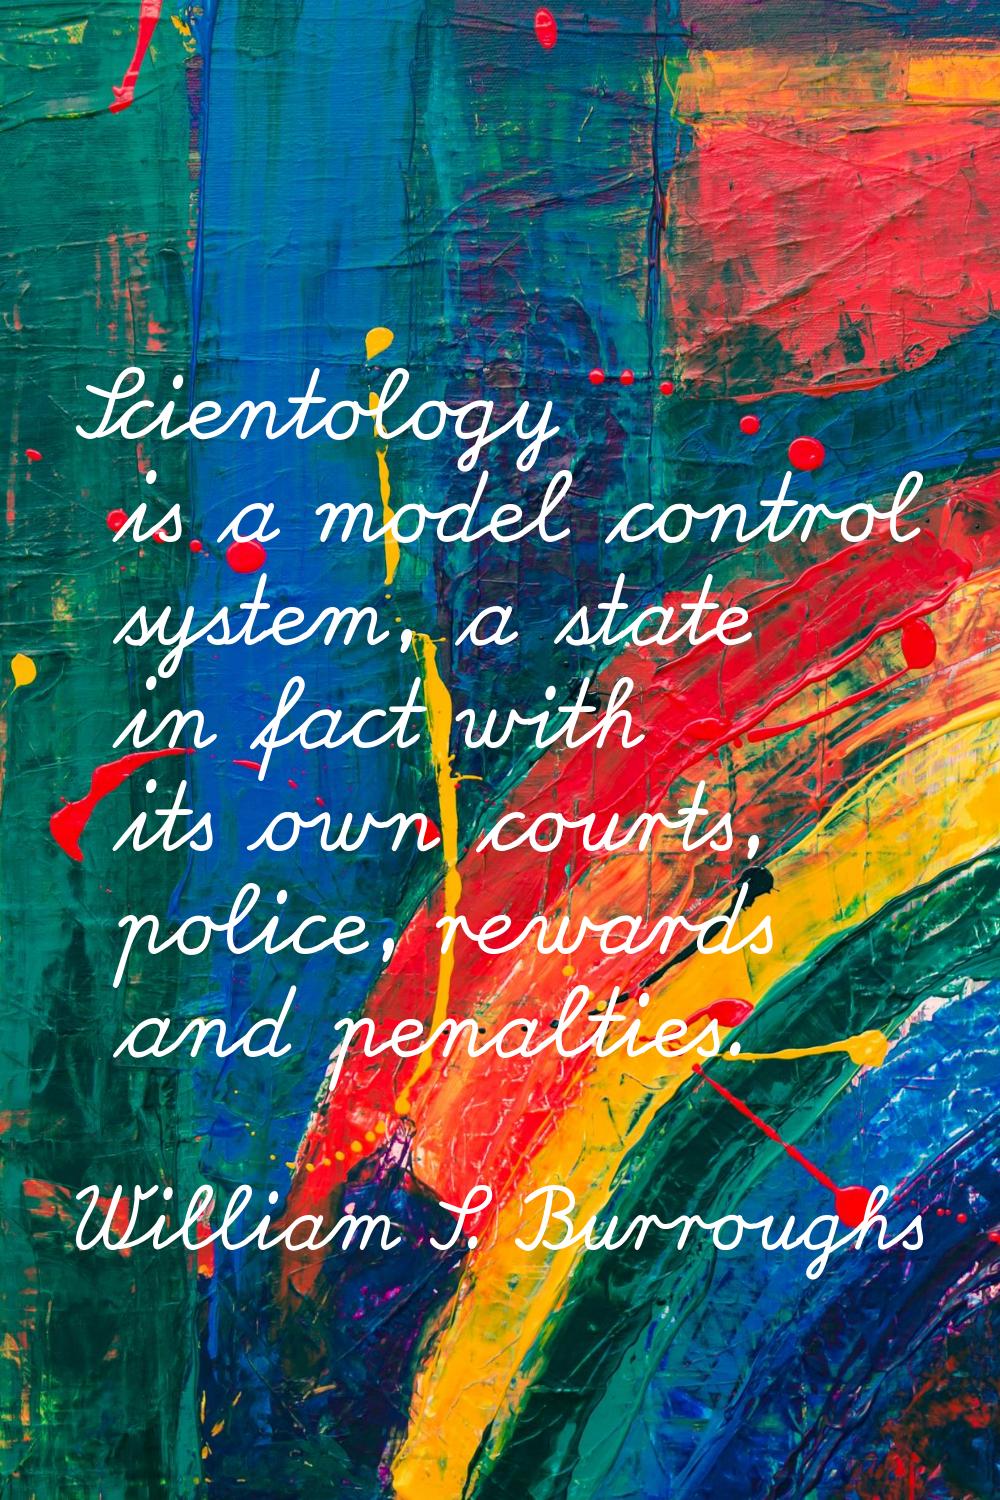 Scientology is a model control system, a state in fact with its own courts, police, rewards and pen